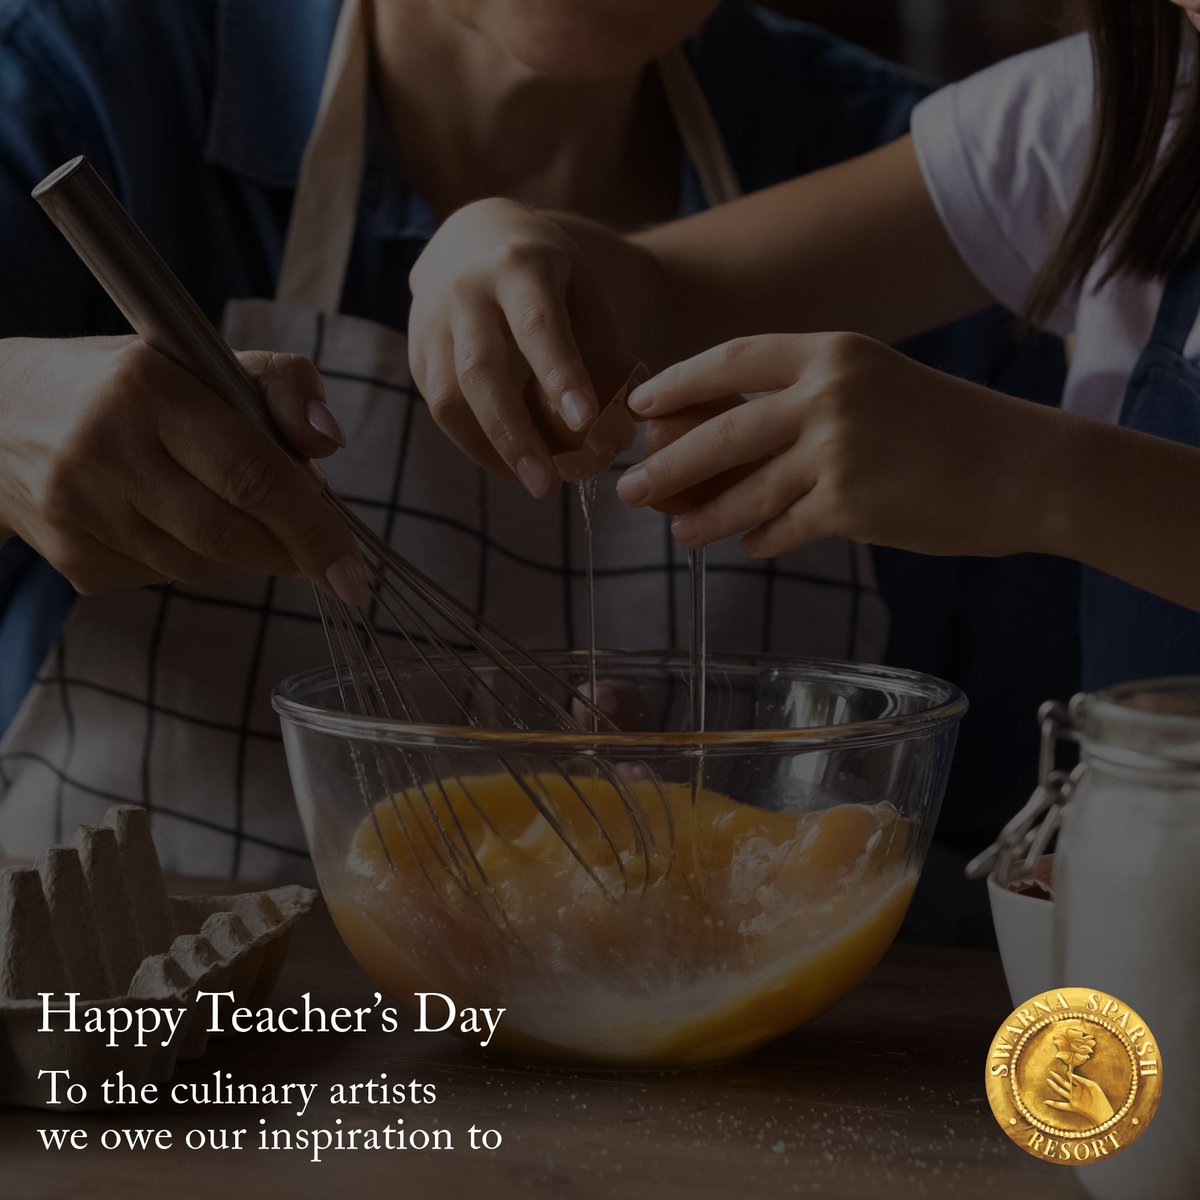 Jamie Oliver, Gordon Ramsay, and Vikas Khanna are just a few of the many chefs who are teachers and inspirations for the culinary experience at Swarna Sparsh. Experience our rendition of these world-class chef’s teachings this Teacher’s Day.

#SwarnaSparsh #HappyTeachersDay https://t.co/nEGg5iYmhp